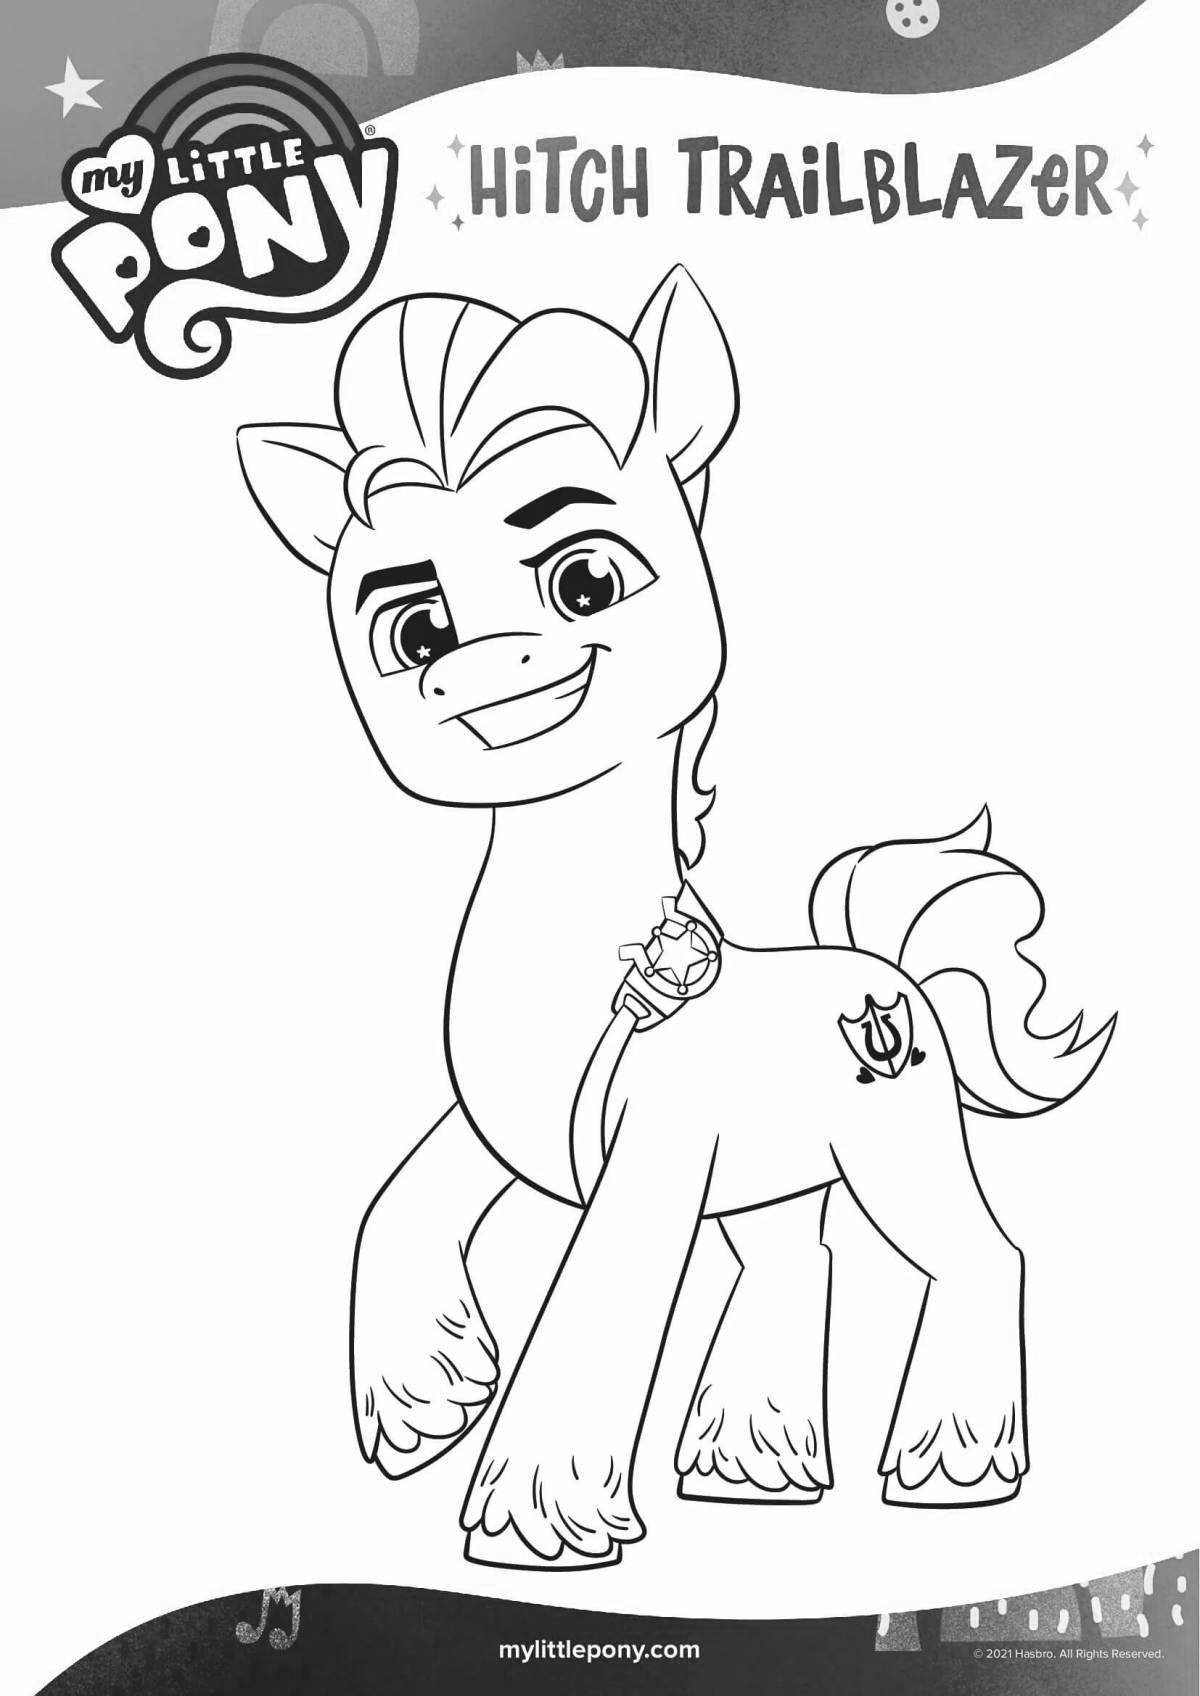 Awesome pony izzy coloring book